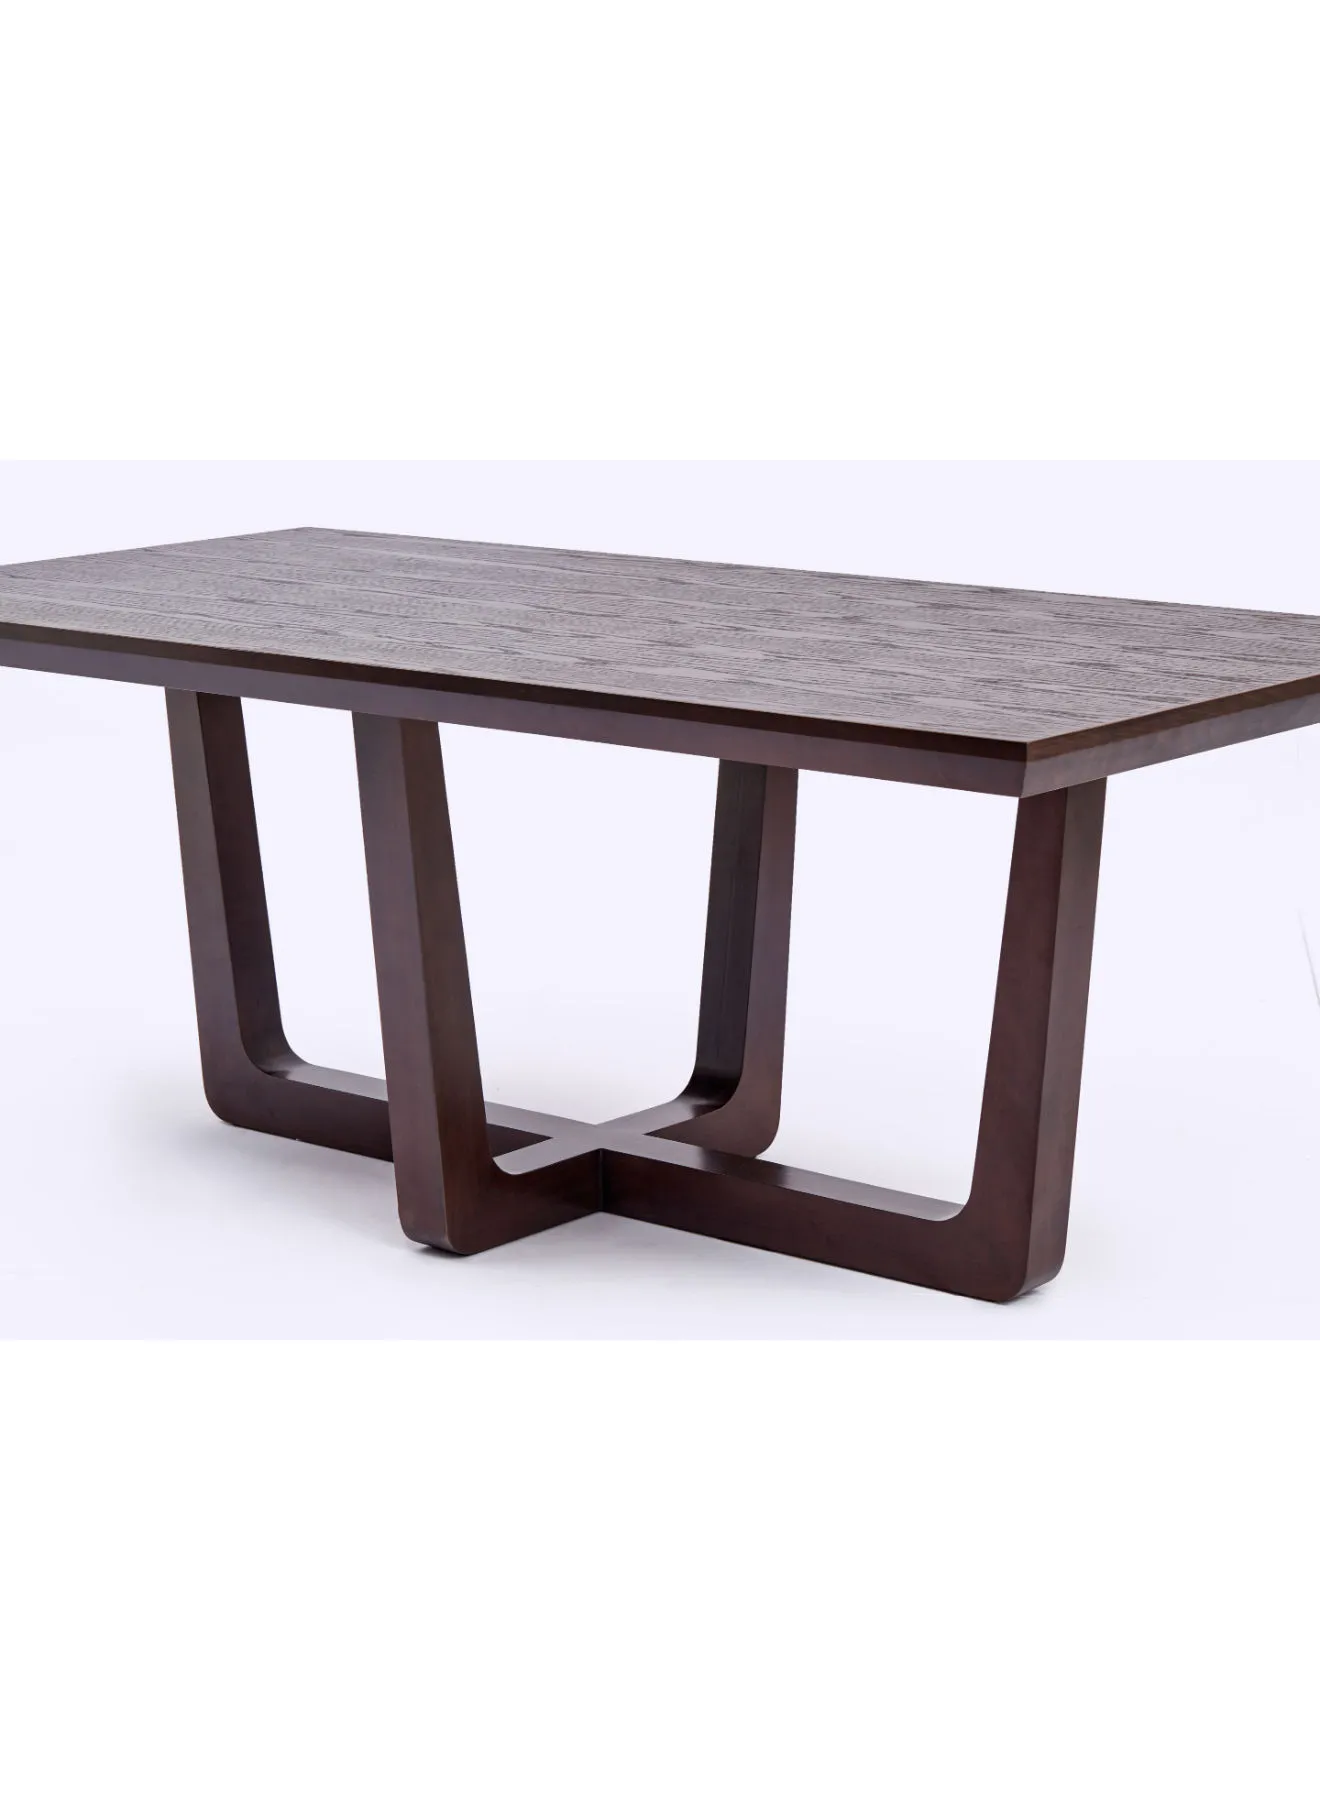 ebb & flow Dining Table Luxurious - 6 Seater - Brown Gregory Collection Wood 2000 X 980 X 760mm in dark brown